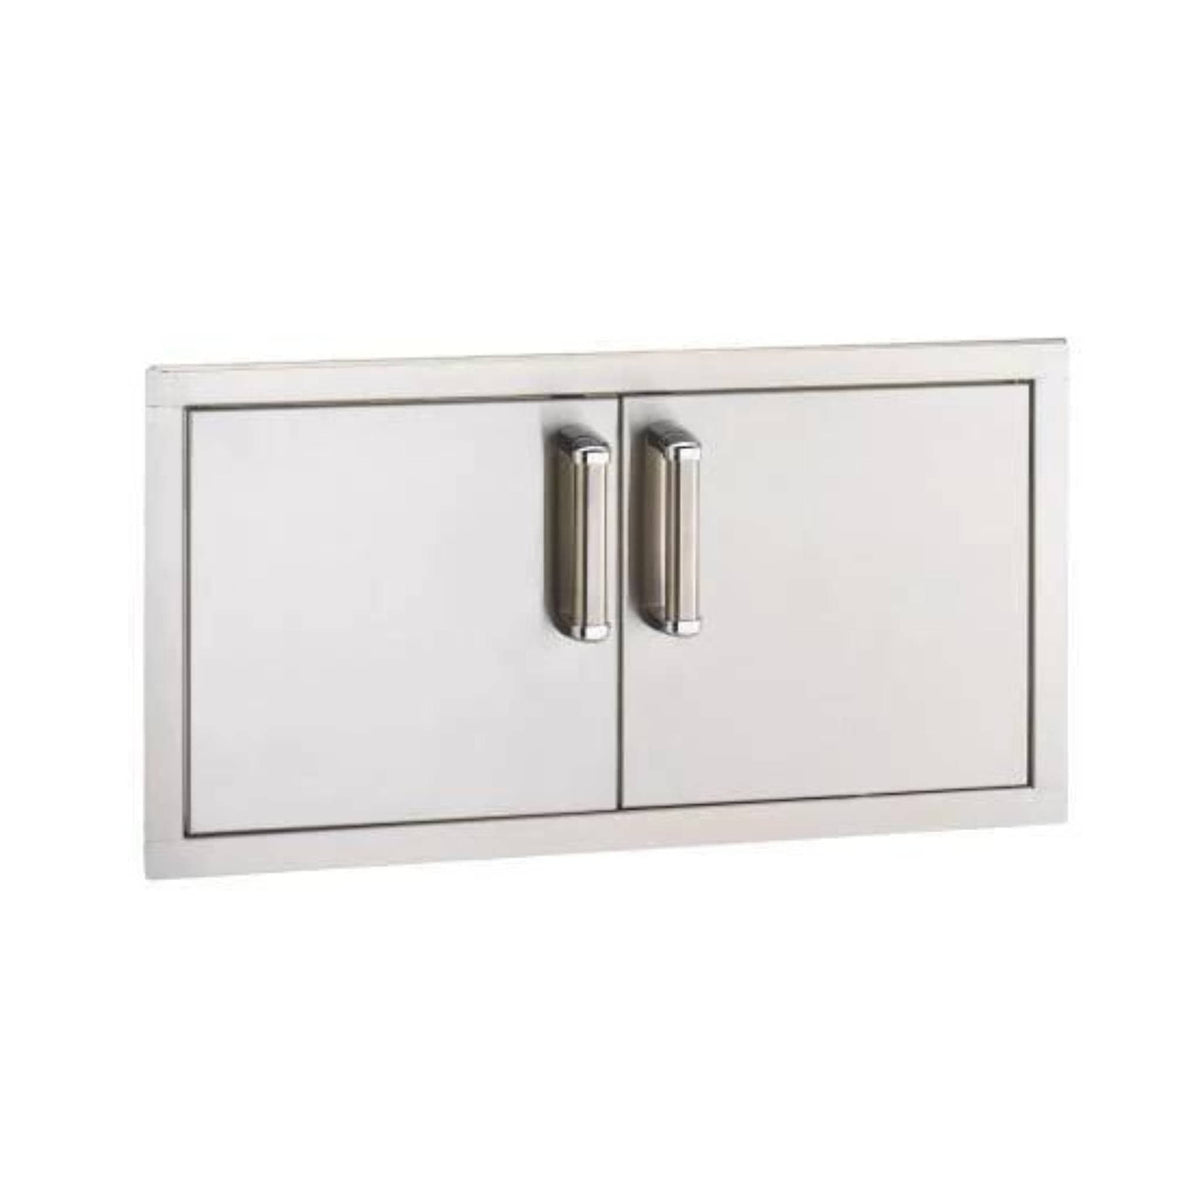 Fire Magic Double Access Doors (Reduced Height) 53934SC